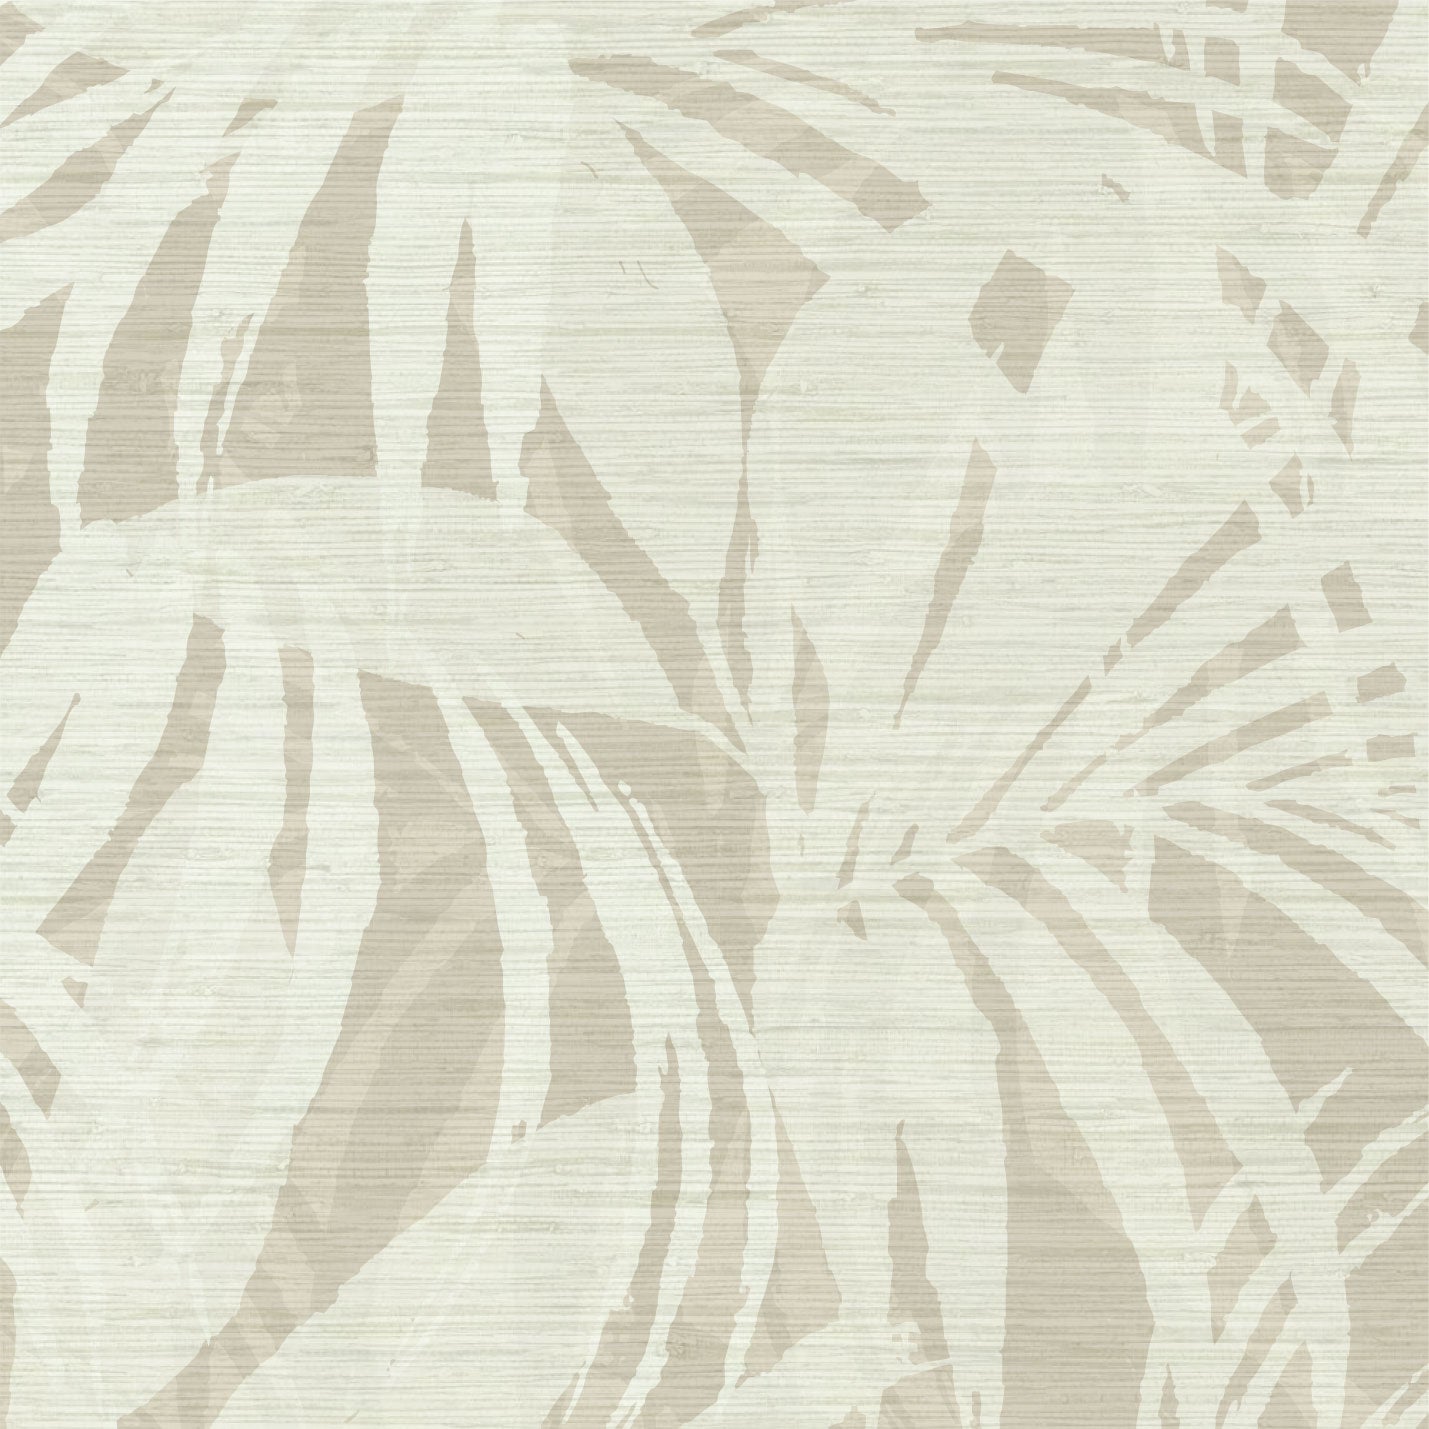 printed grasscloth wallpaper oversize tropical leaf Natural Textured Eco-Friendly Non-toxic High-quality Sustainable practices Sustainability Interior Design Wall covering Bold retro chic custom jungle garden botanical Seaside Coastal Seashore Waterfront Vacation home styling Retreat Relaxed beach vibes Beach cottage Shoreline Oceanfront white palm tan sand beige neutral cream off-white tonal